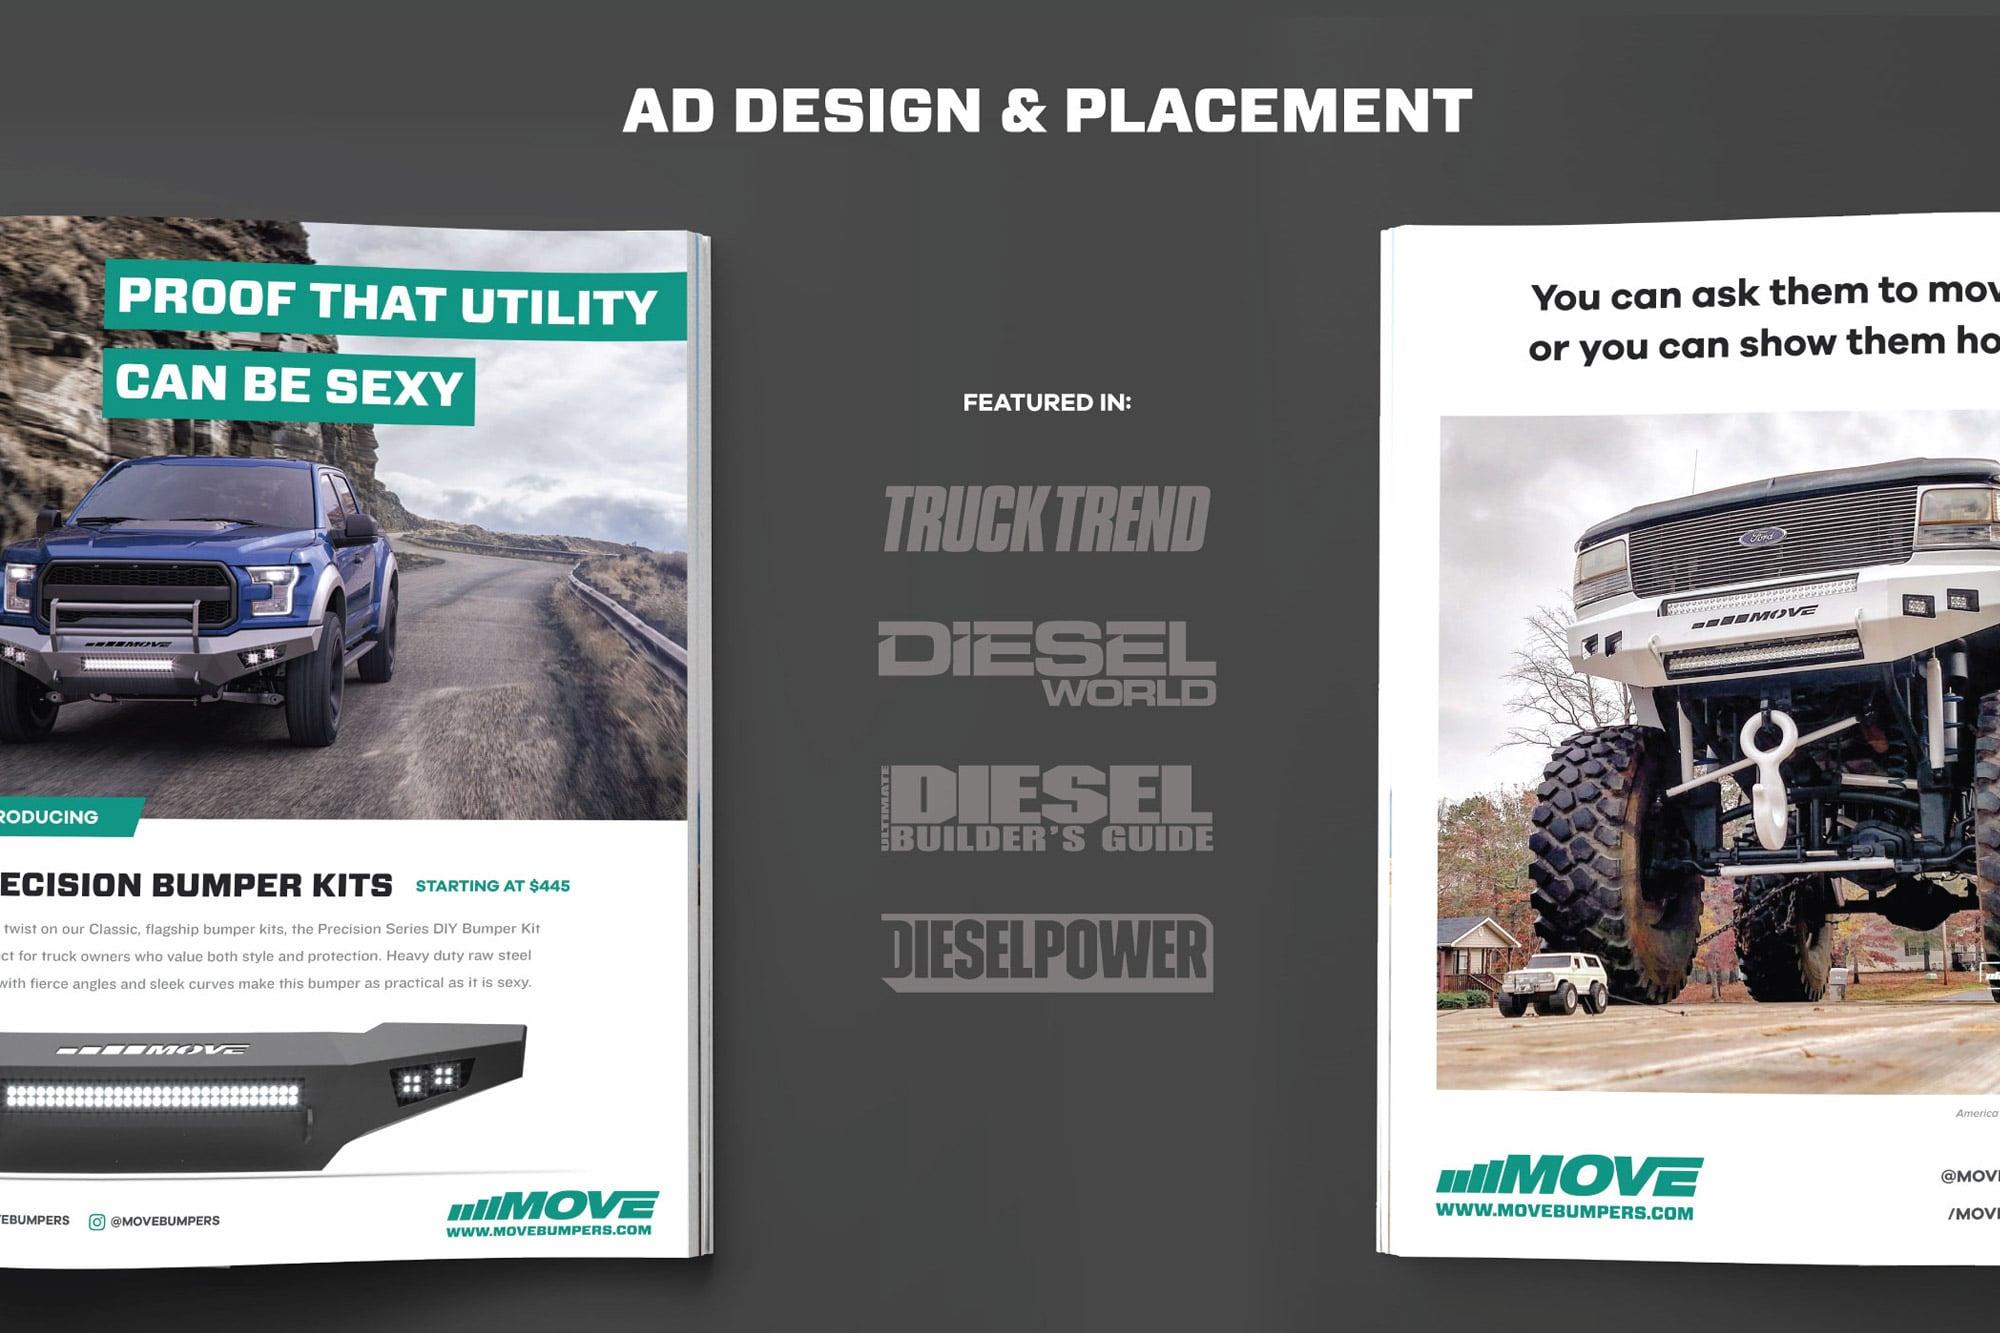 MOVE Bumpers Print Ads